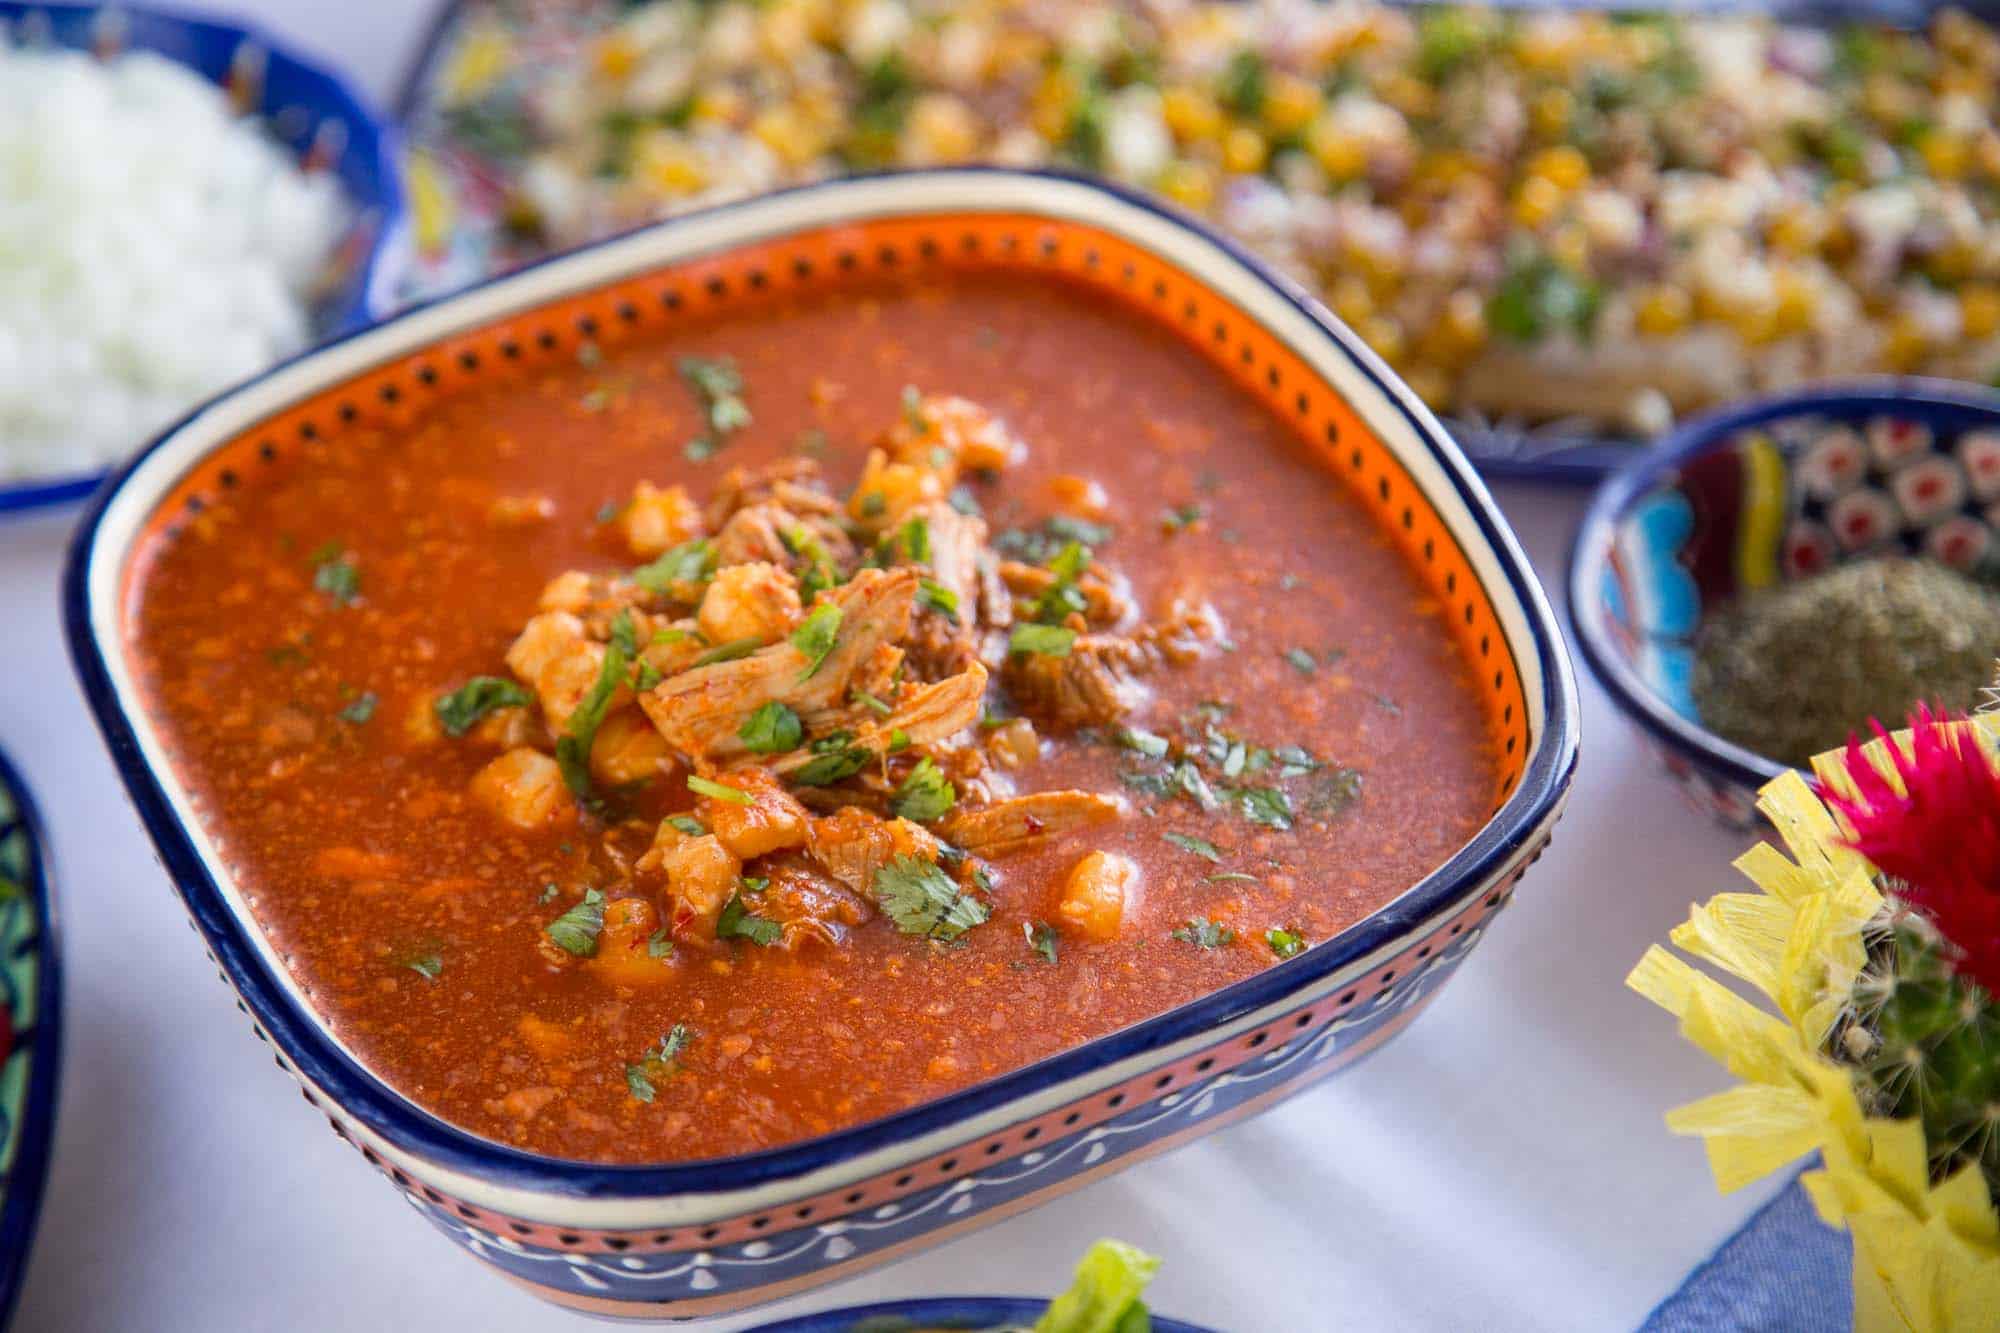 red pozole in a colorful dish on a white tablecloth with other dishes nearby.